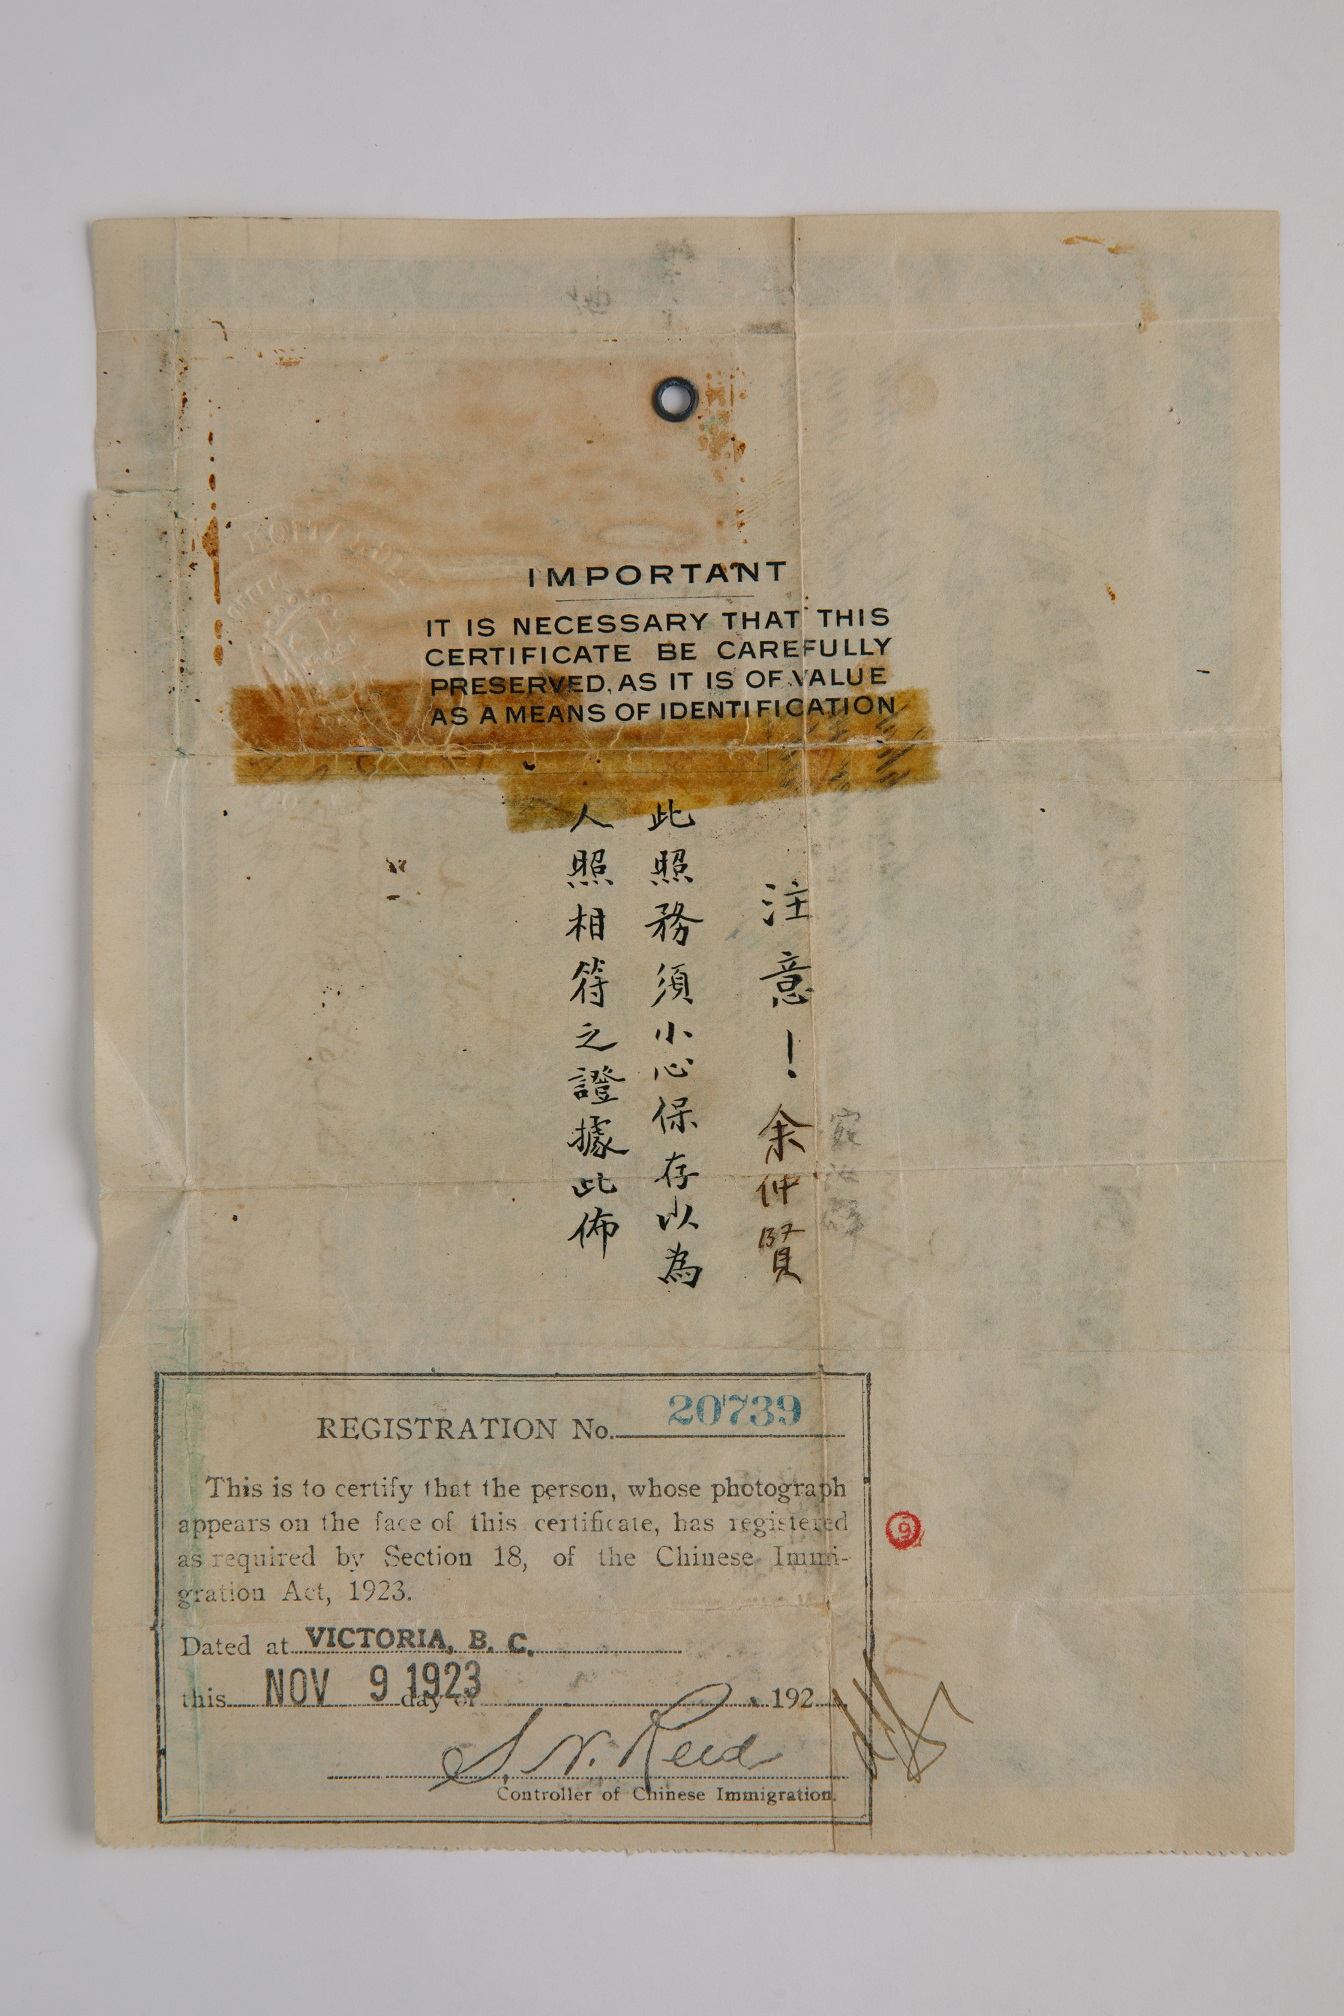 Photograph of the backside of a piece of paper. In the centre is stamped, “IMPORTANT / It is necessary that this certificate be carefully preserved as it is of calue as a means of identification”. In the bottom left corner is a registration number and certification stamp, date, and signature.